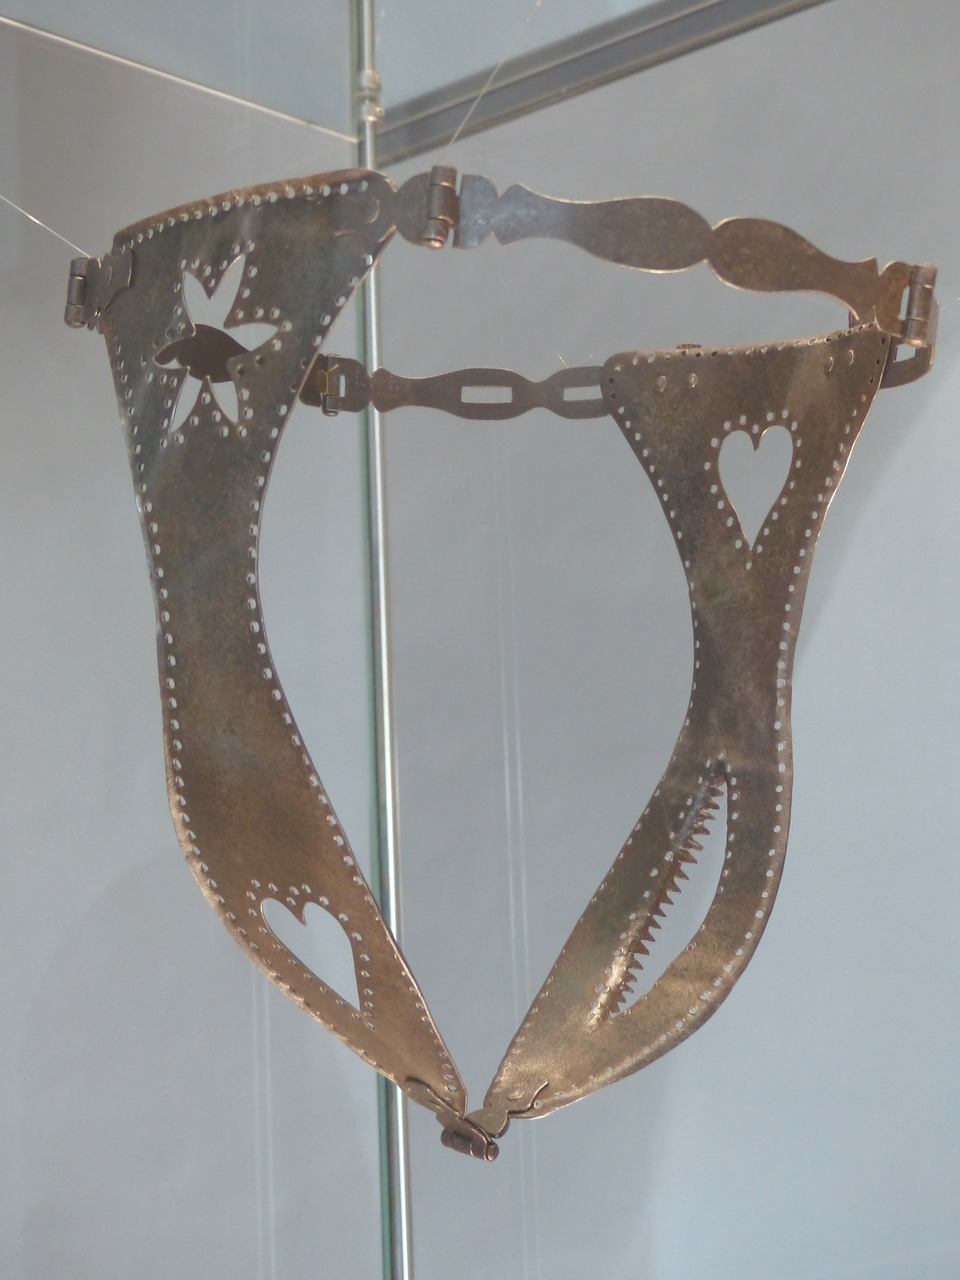 chastity belt middle ages instrument of torture free photo